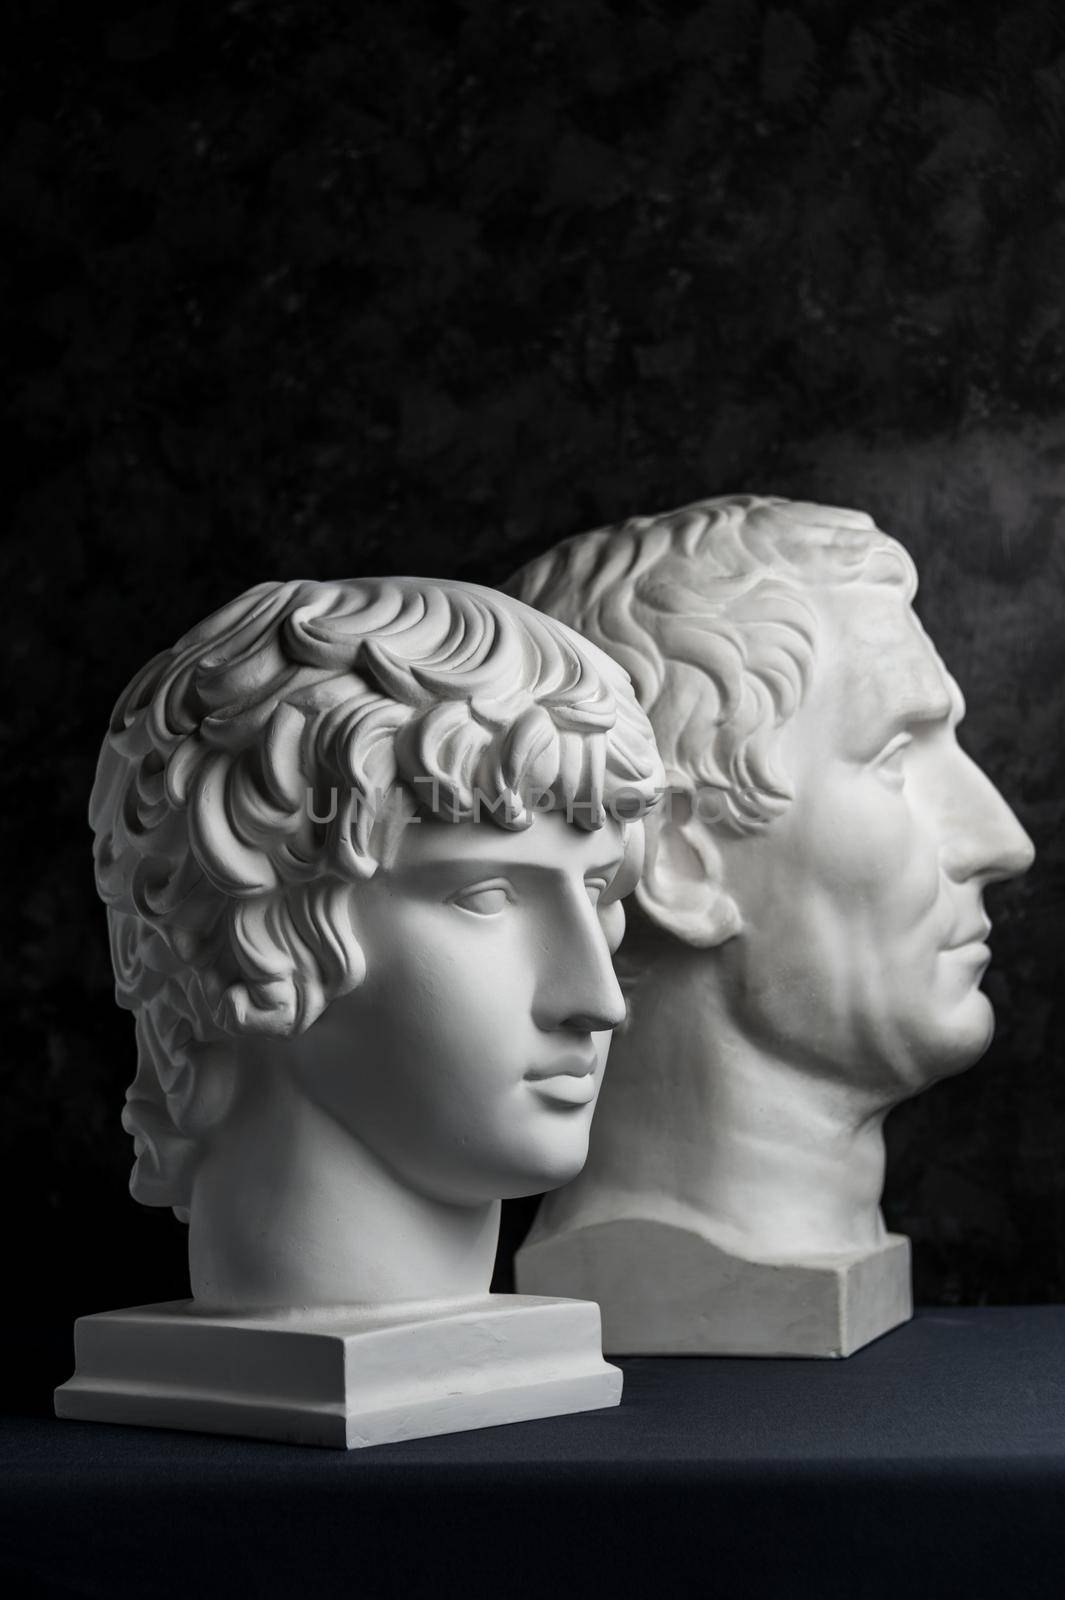 Gypsum copy of ancient statue Augustus and Antinous head on dark textured background. Plaster sculpture mans face. by bashta